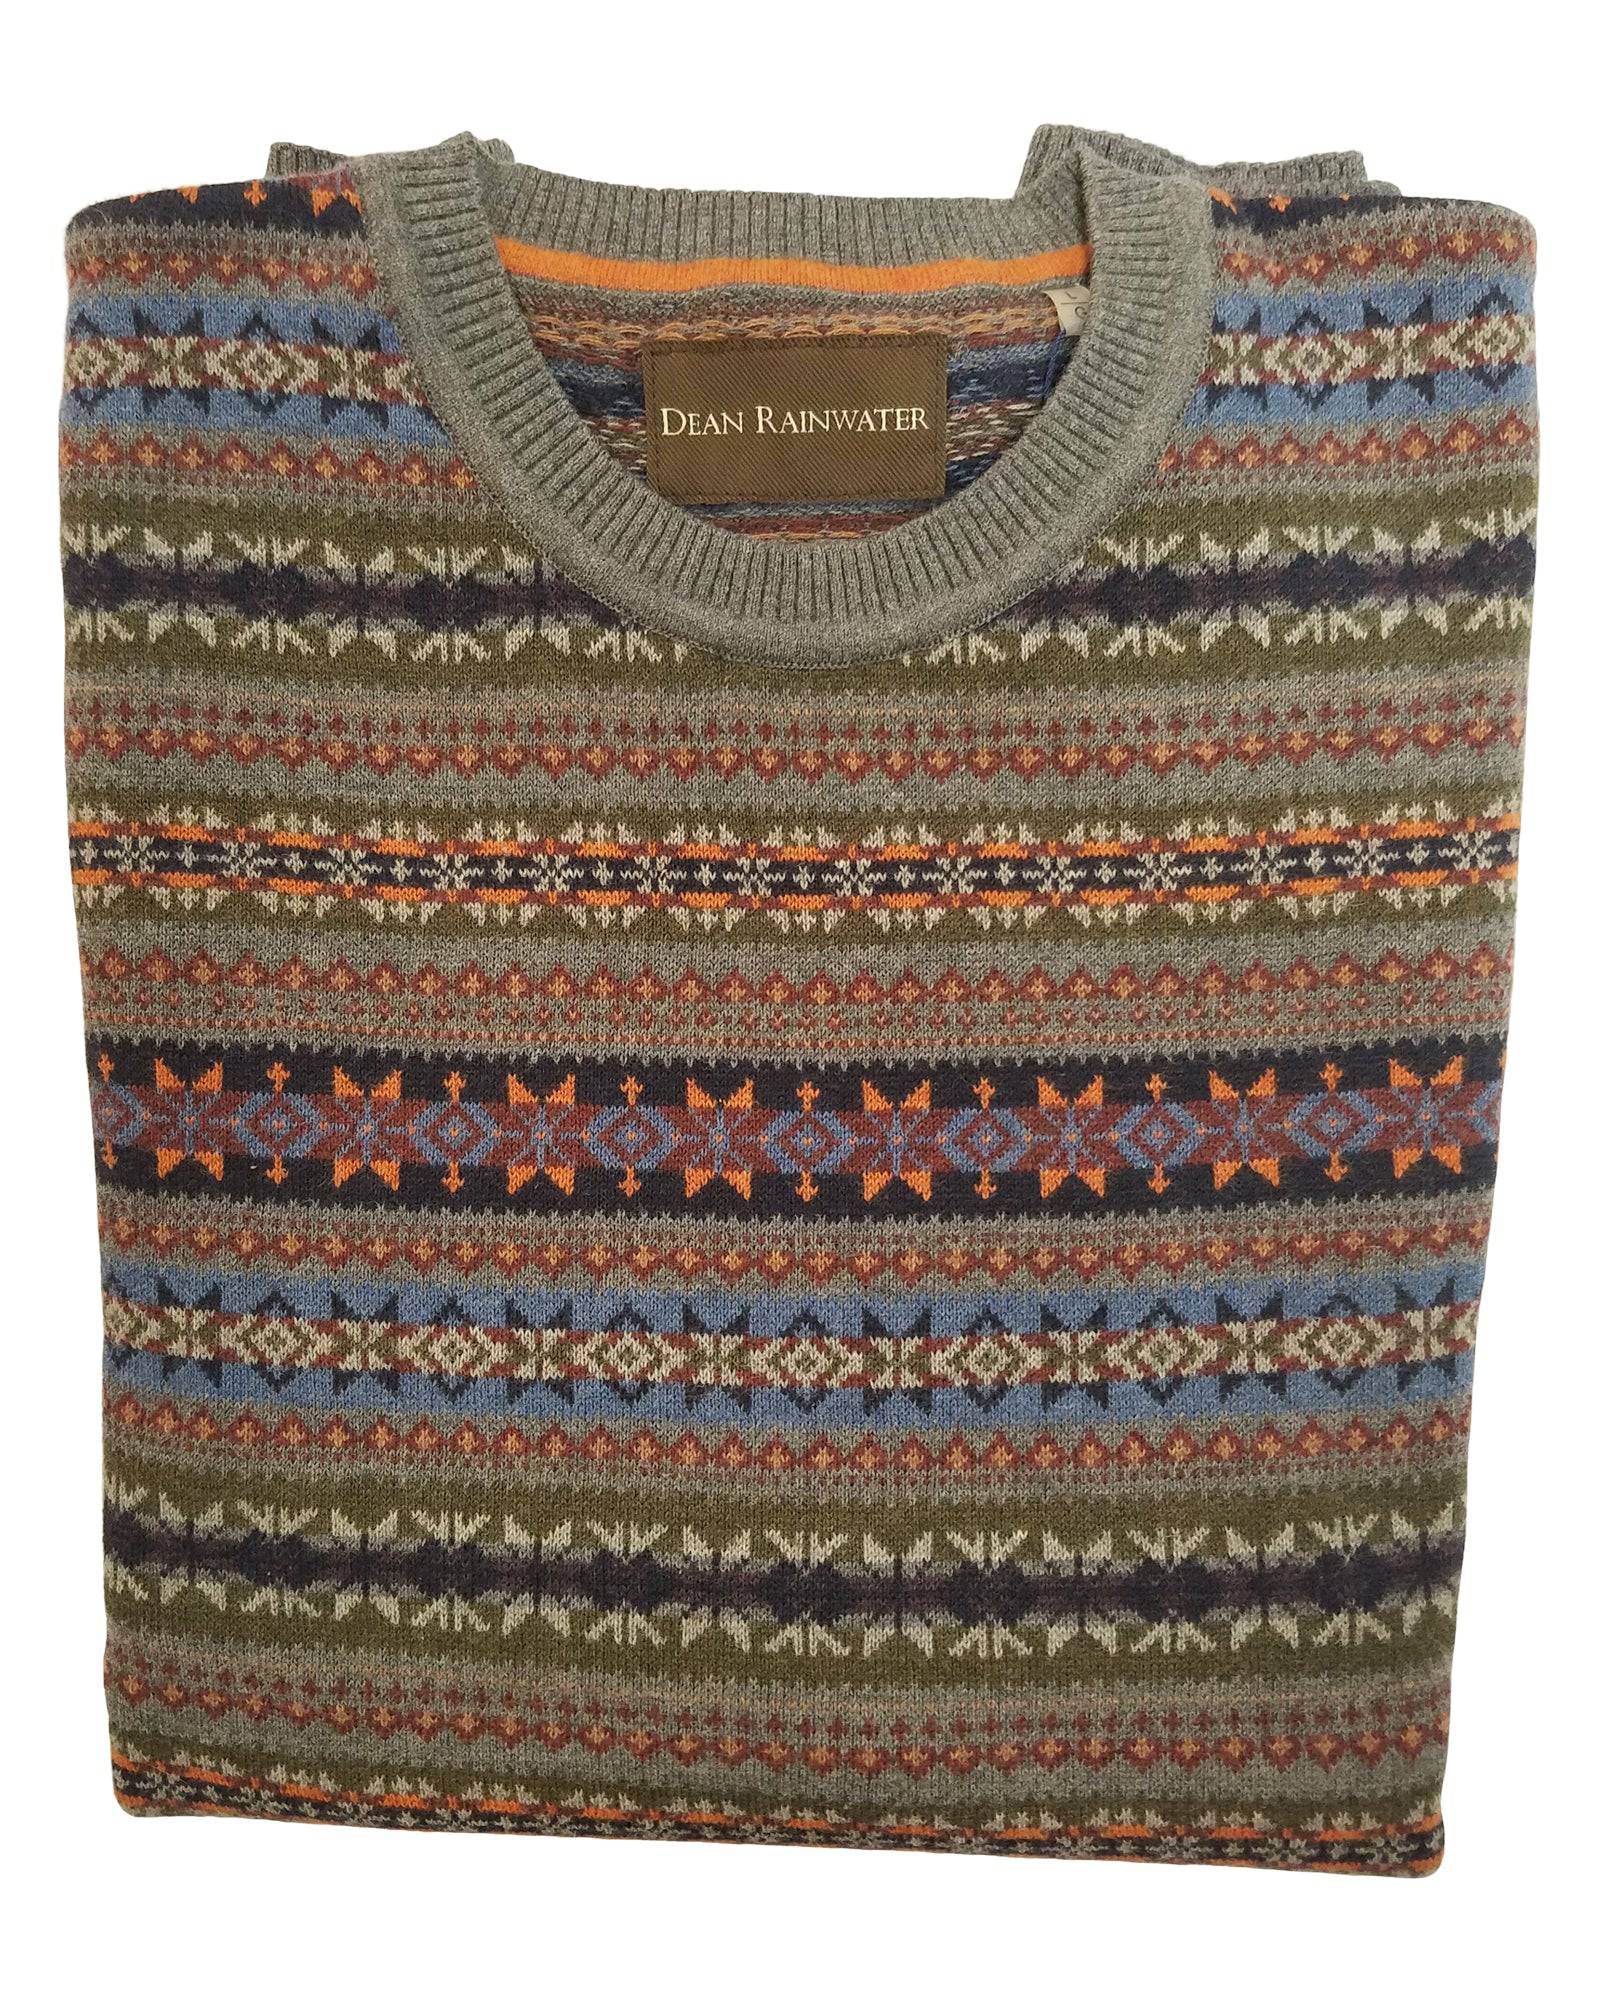 Crew Neck Sweater in Grey Fair Isles Pattern Cotton Blend - Rainwater's Men's Clothing and Tuxedo Rental